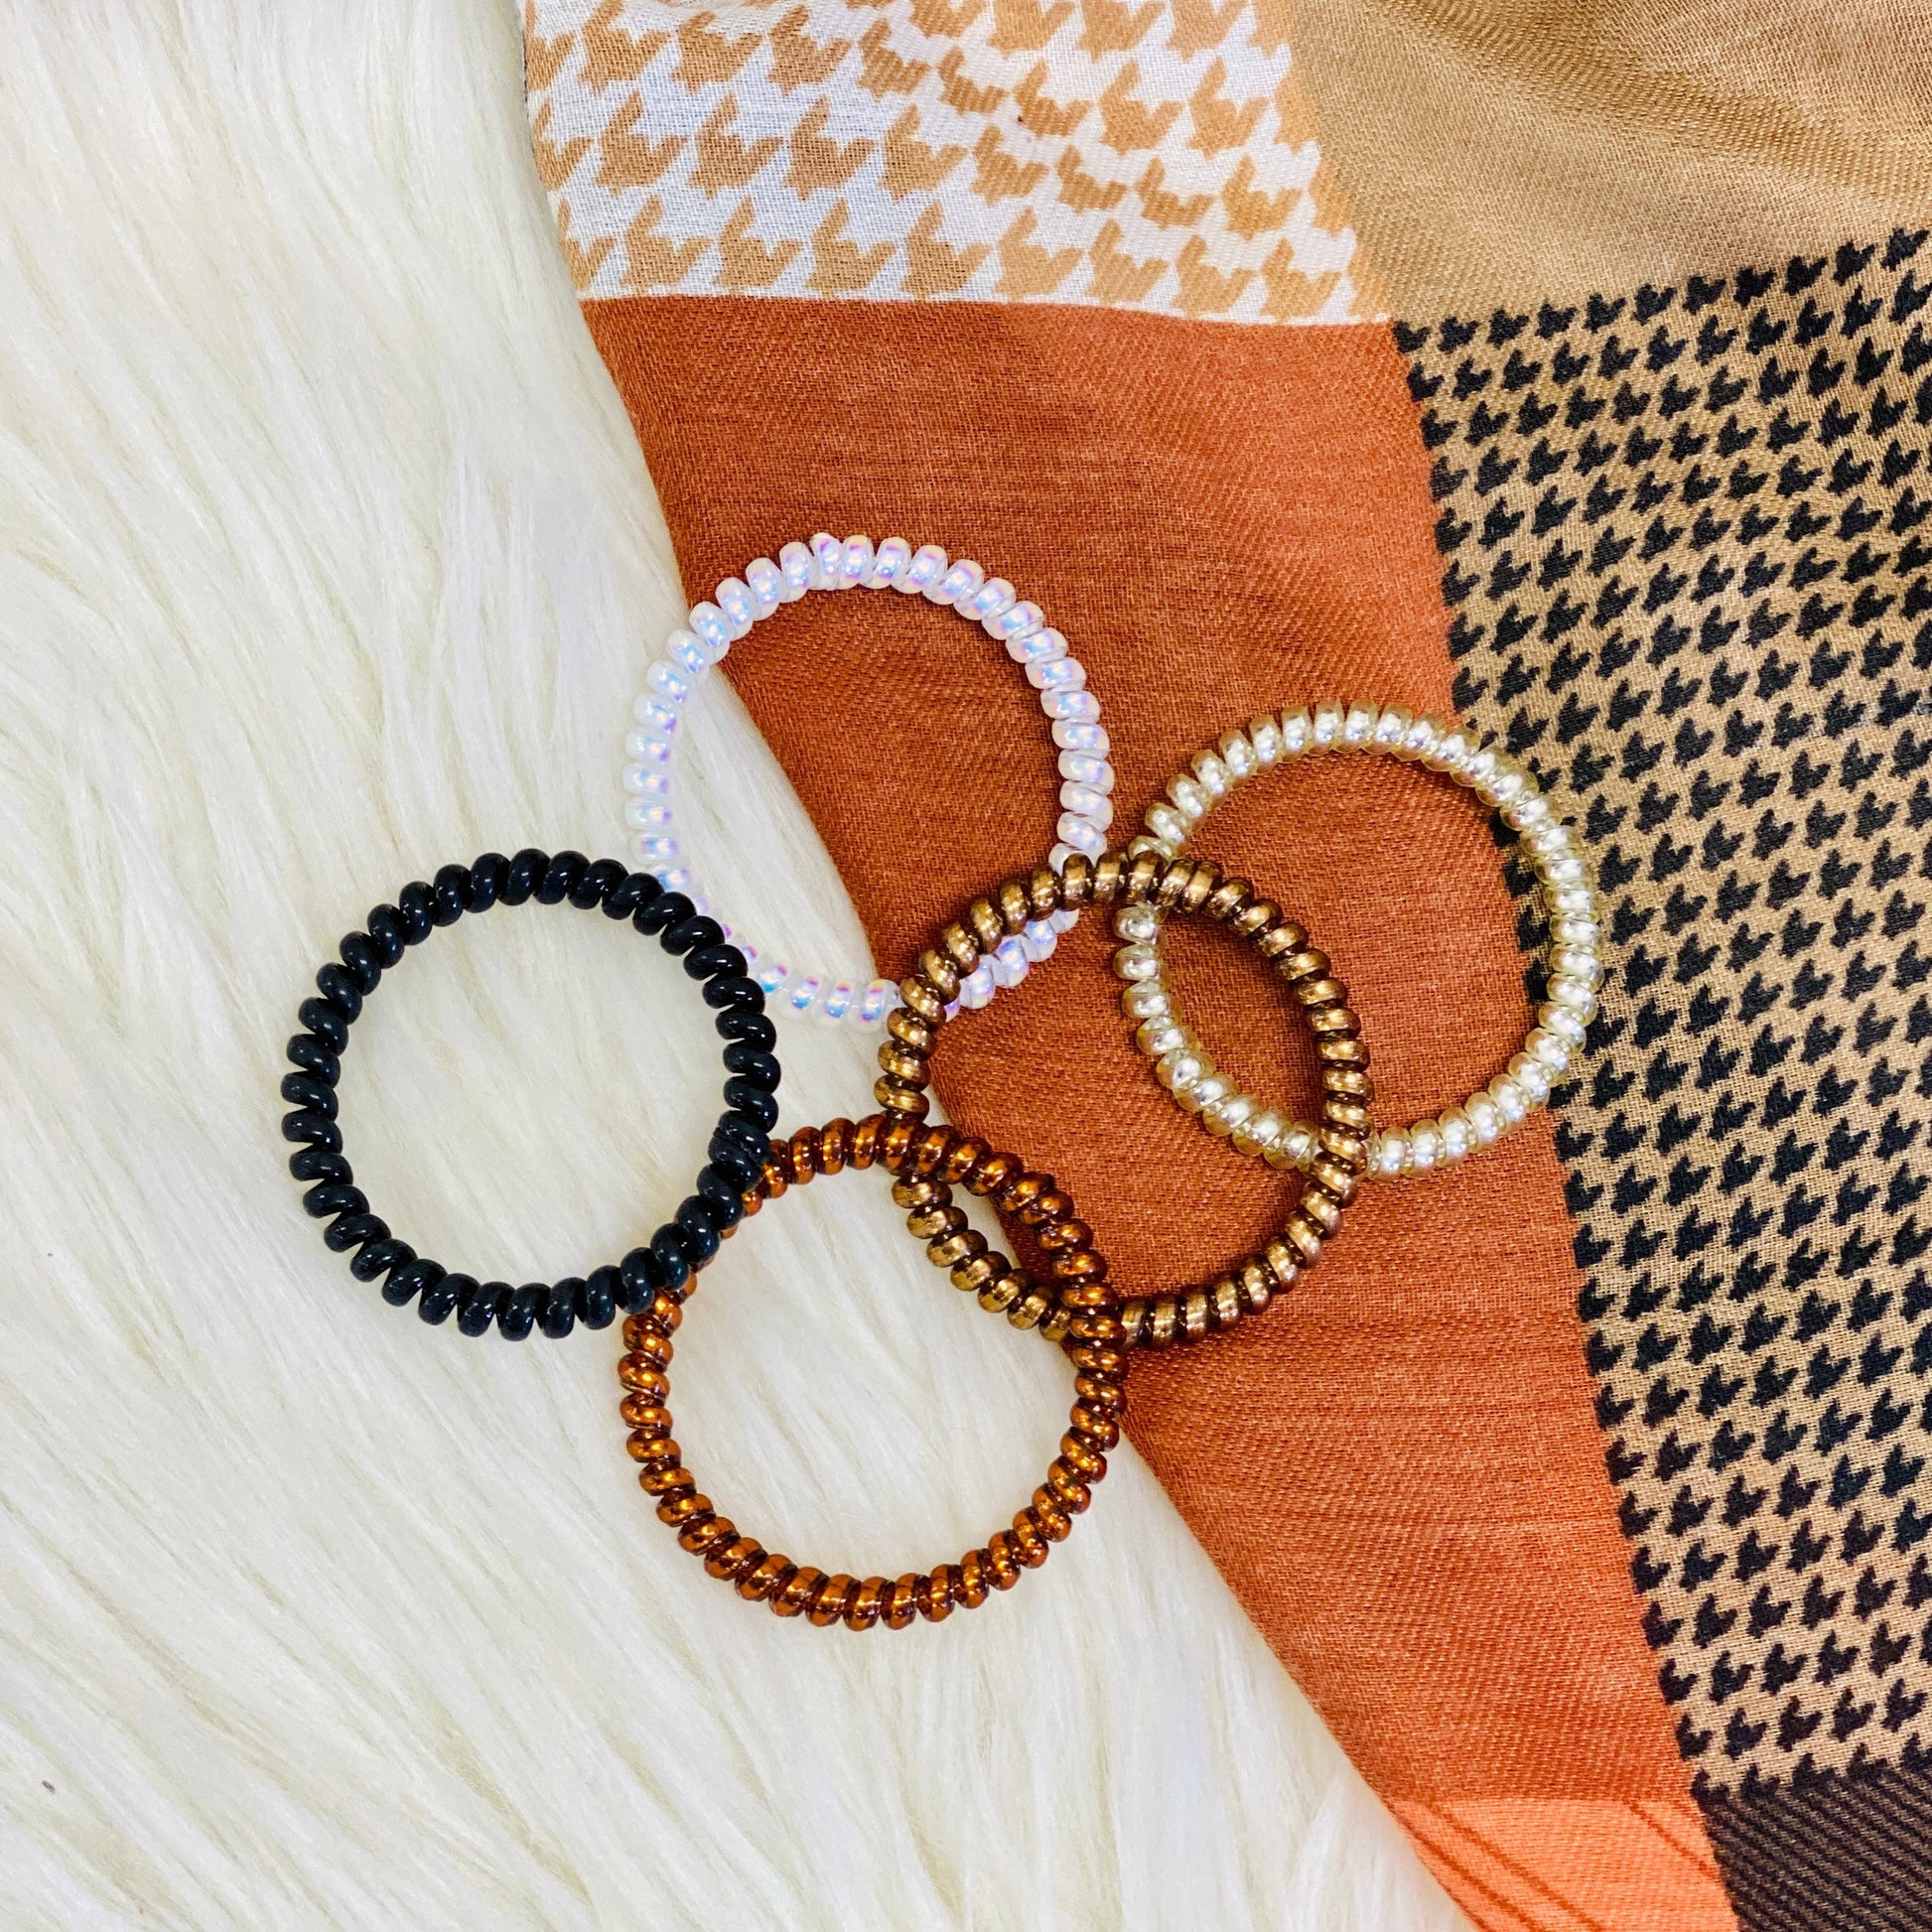 Hotlines are the BEST hair ties. We might be biased, but once you try them, you'll agree! They're ouchless & creaseless. Our coil hair tie design won't give you a headache because they don't pull on your roots! We have 4 sizes of hair ties to accommodate all hair types. Check the graphic to see which one is right for you! 